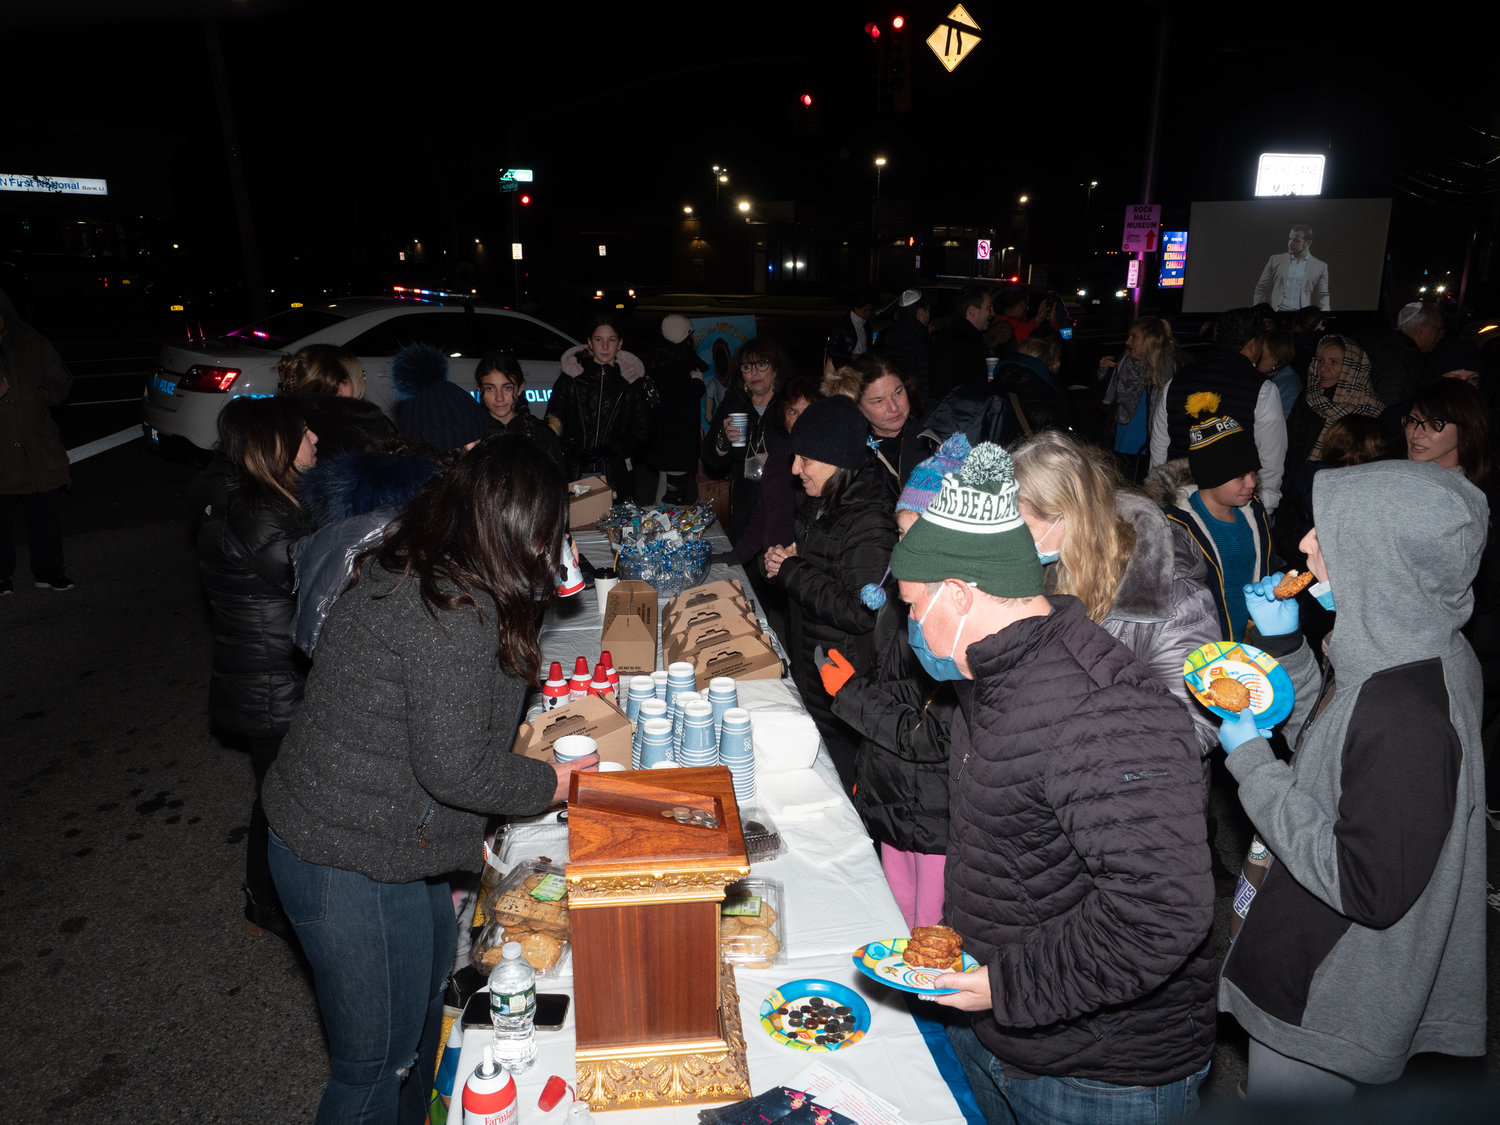 Hot chocolate and the food was going fast at the menorah lighting.